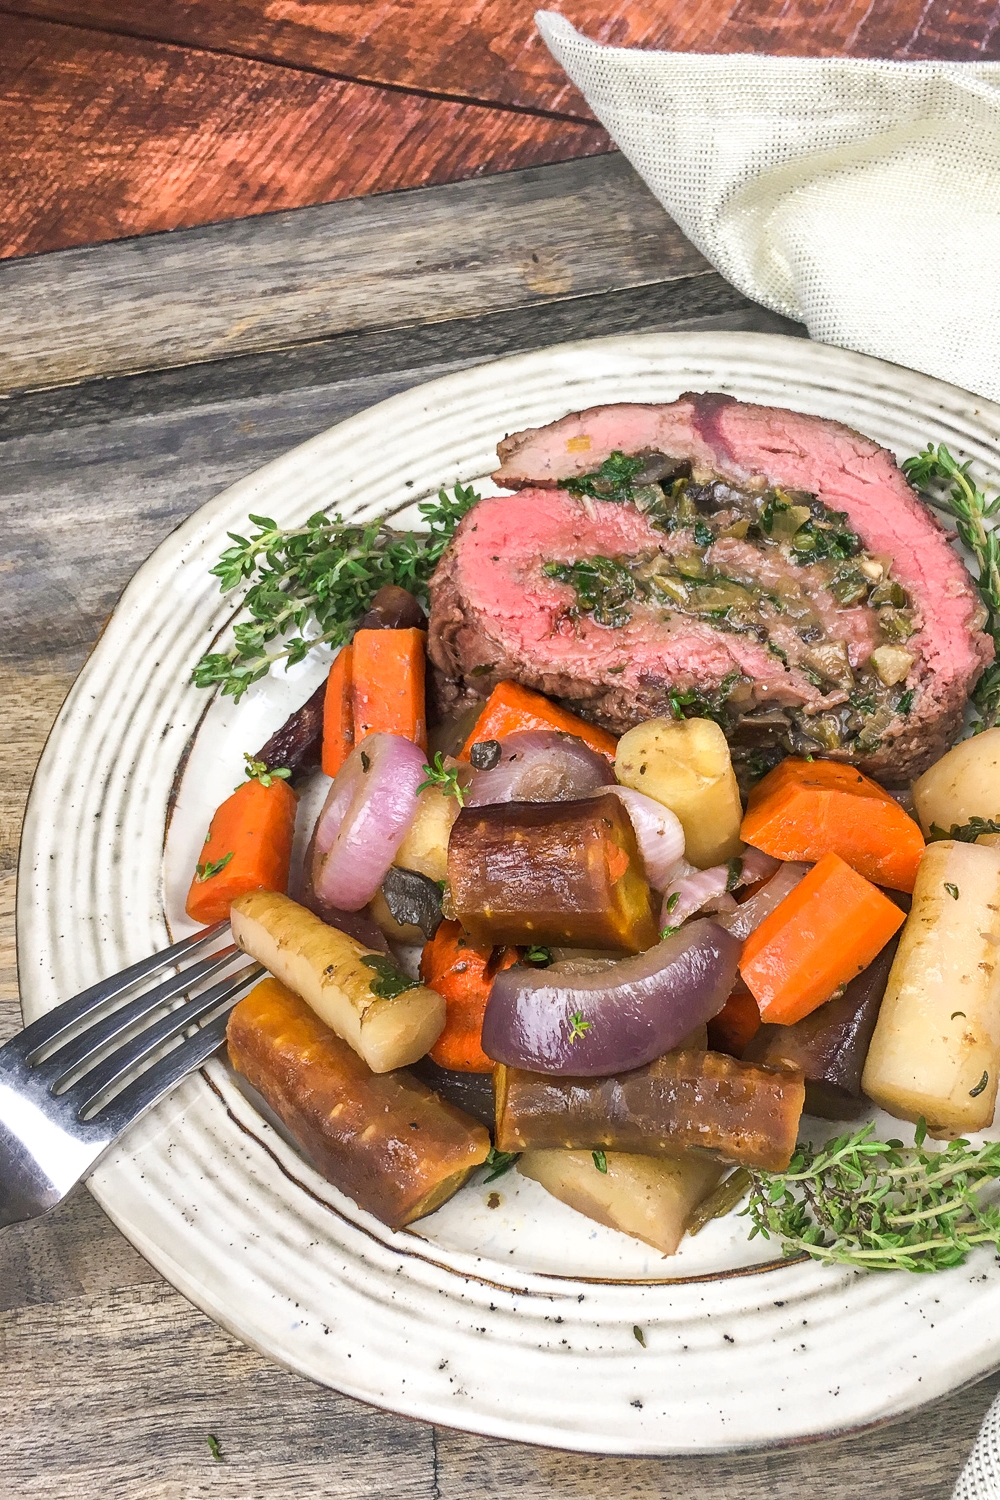 A delicious and easy spinach and mushroom-stuffed beef tenderloin recipe. Perfect for any occasion from weekday meals to Easter dinner!